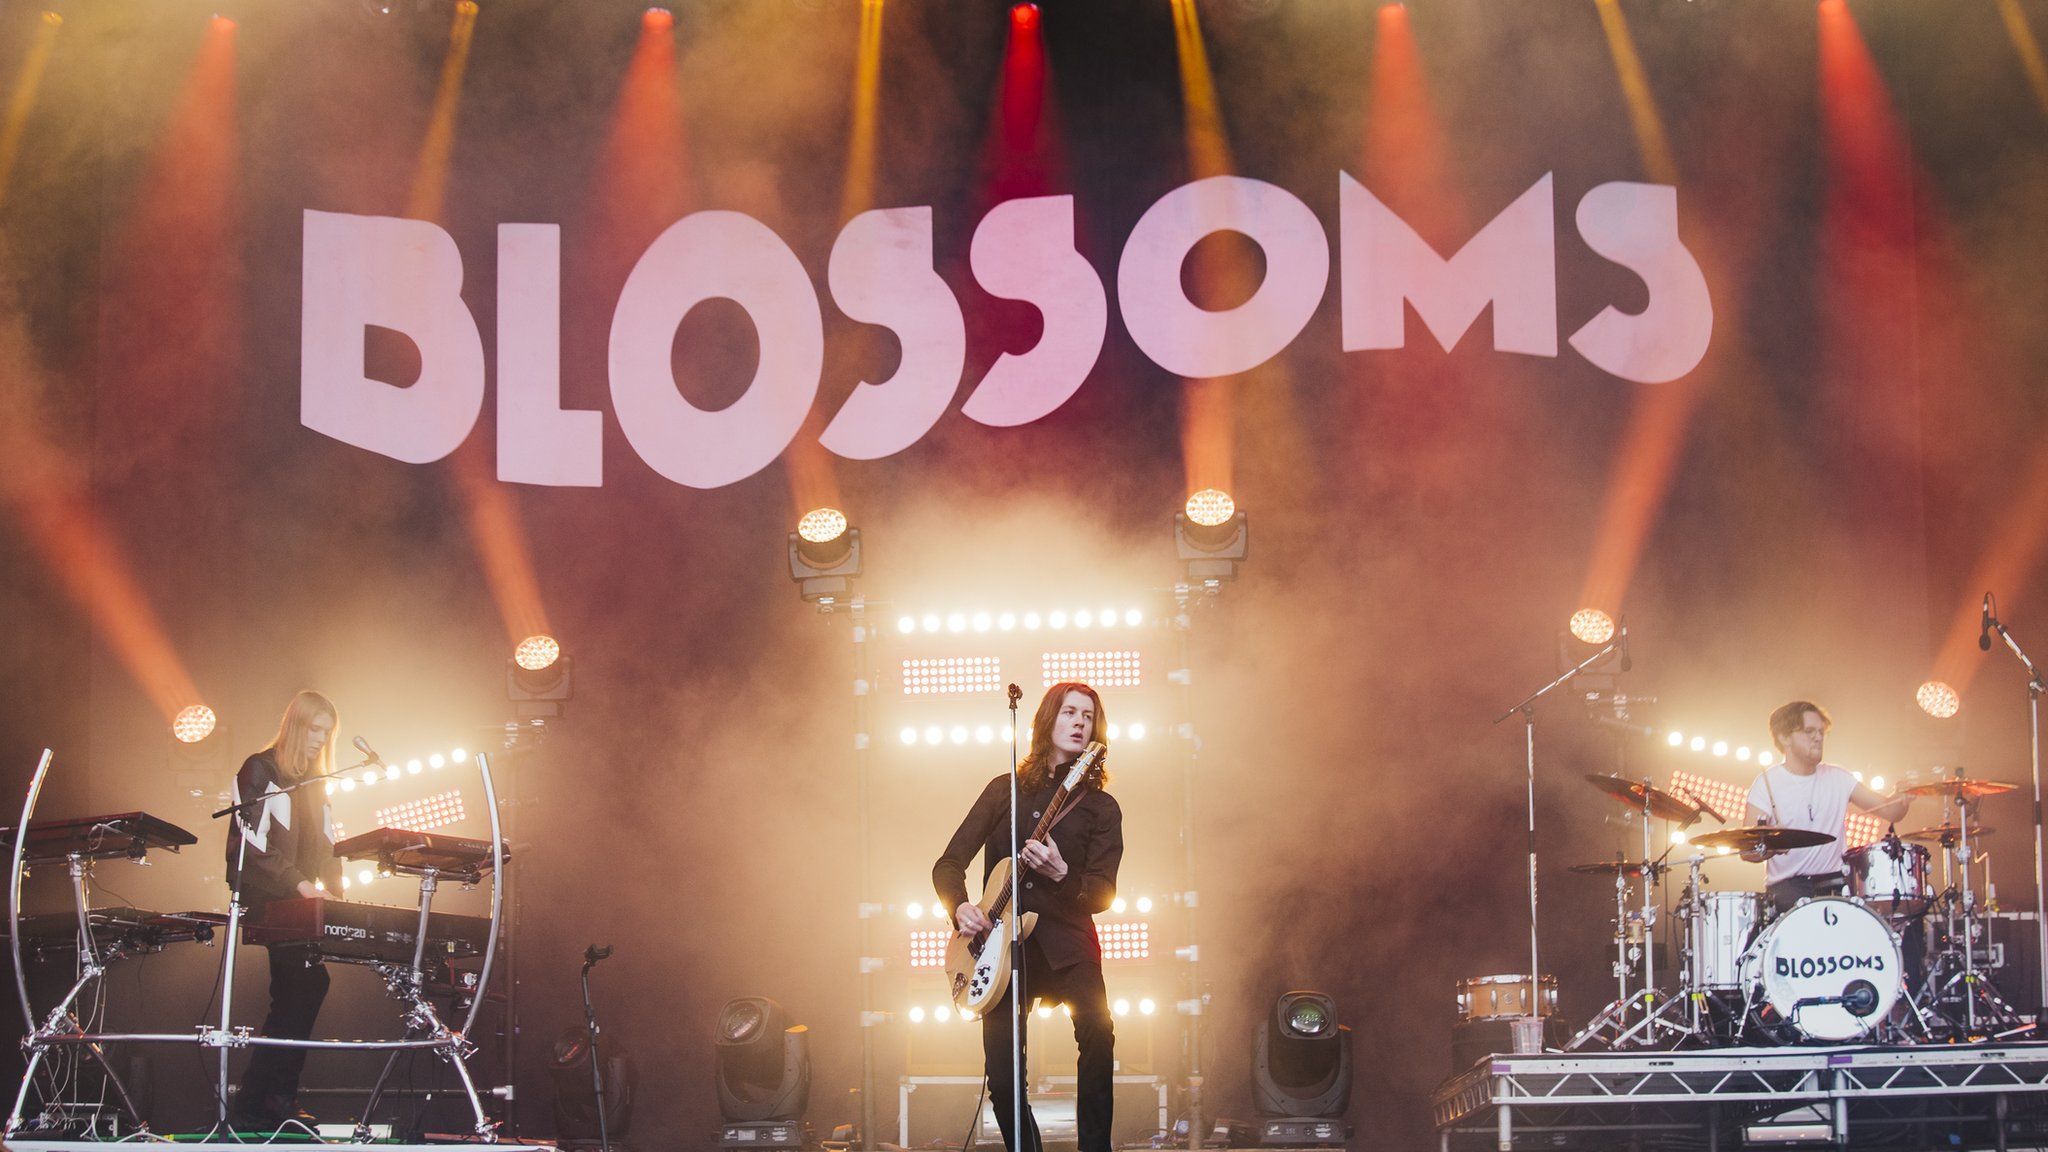 Blossoms on the main stage of Leeds Festival in 2017